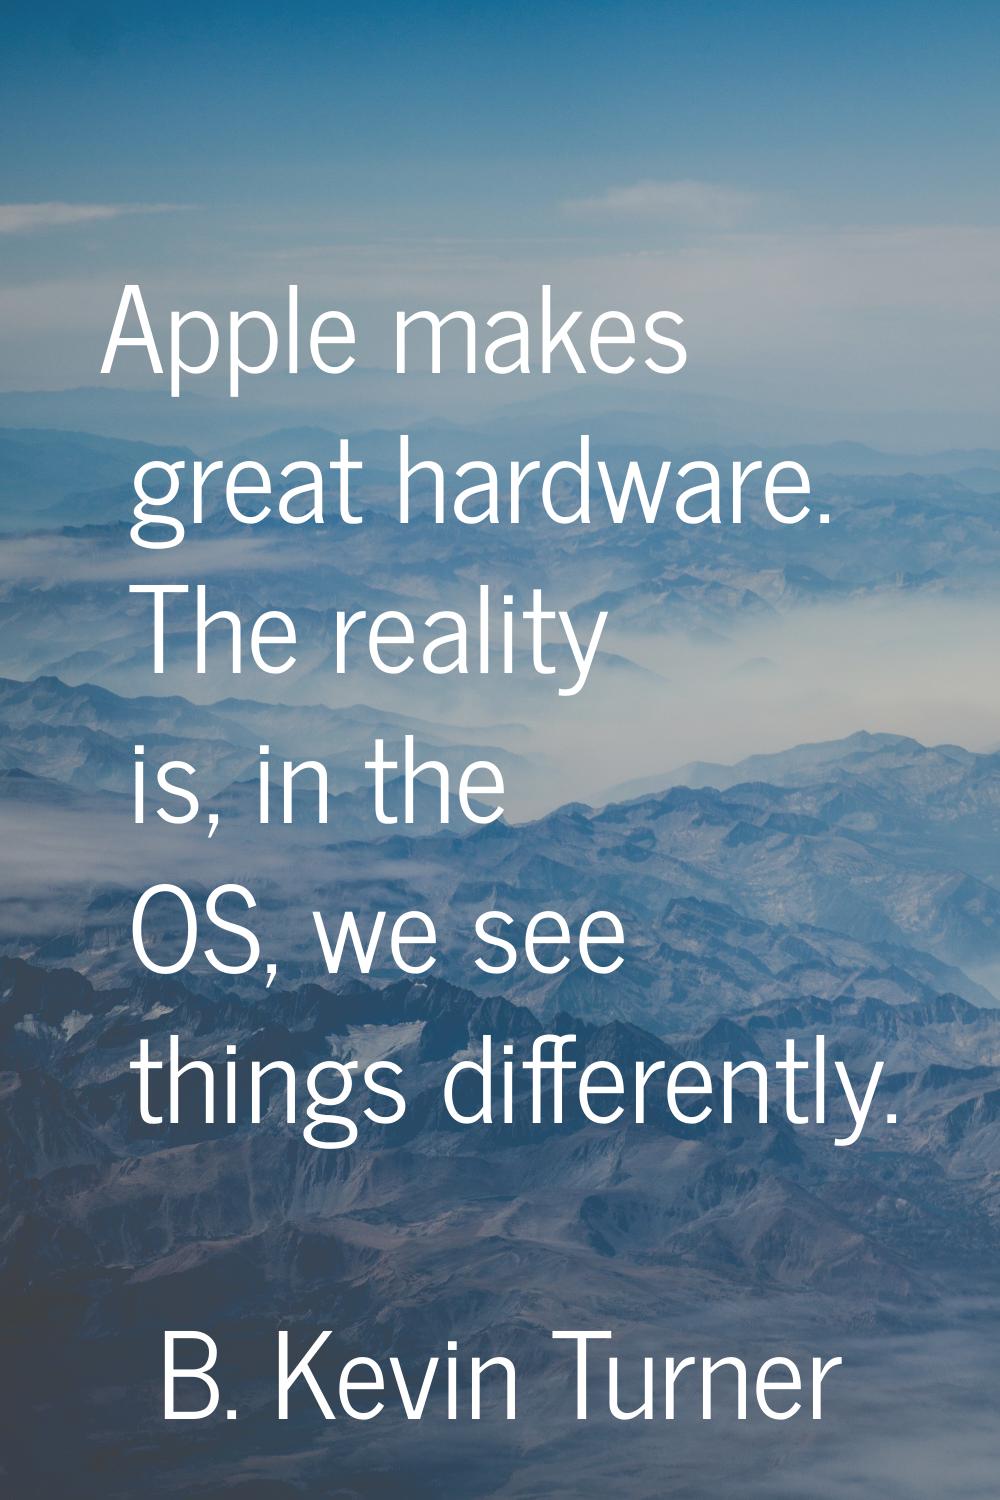 Apple makes great hardware. The reality is, in the OS, we see things differently.